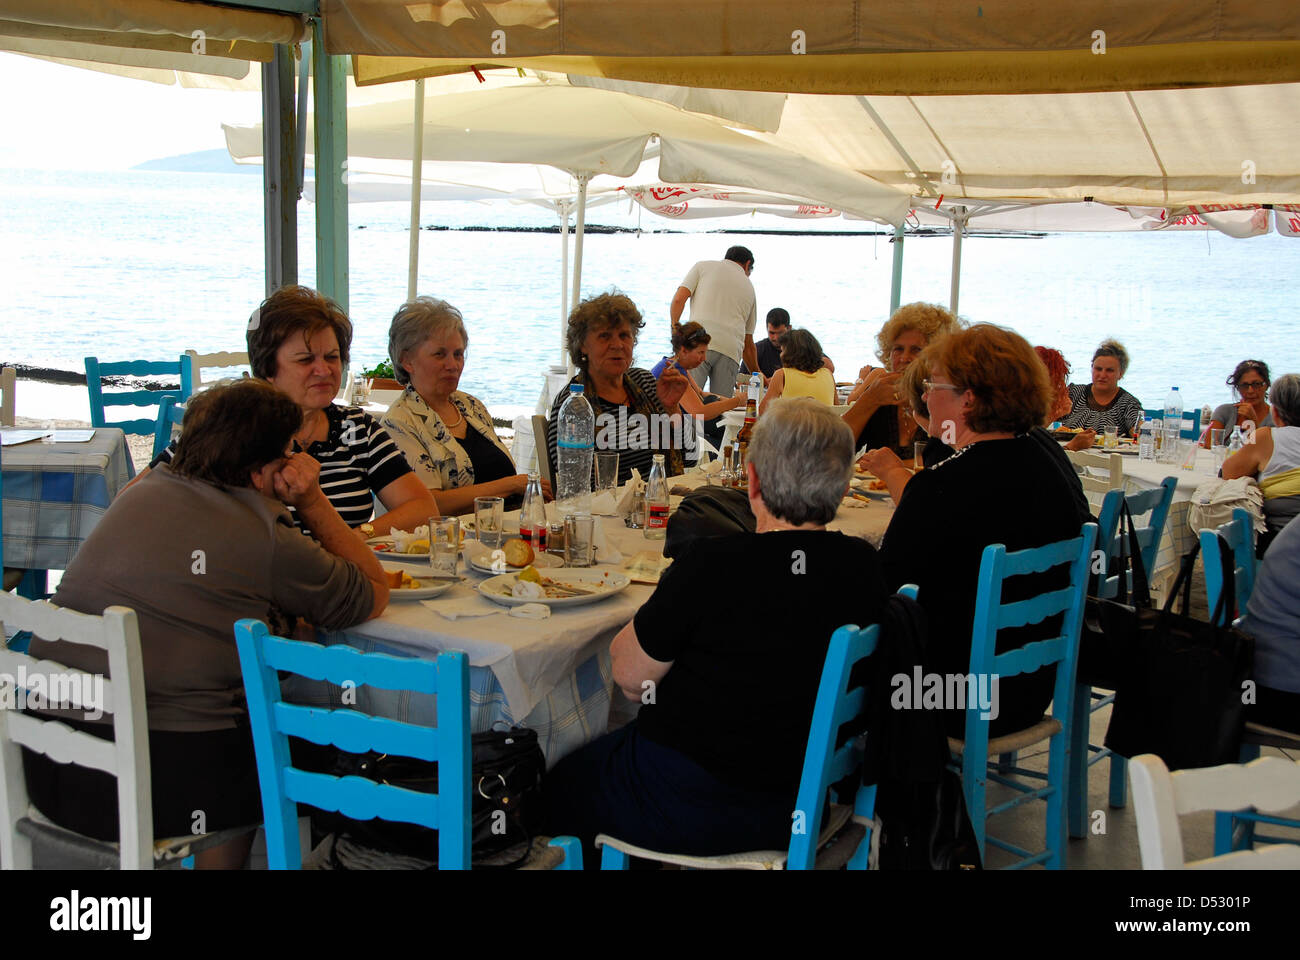 Women having lunch at a restaurant on the island of Aegina in the Saronic Gulf in Greece Stock Photo